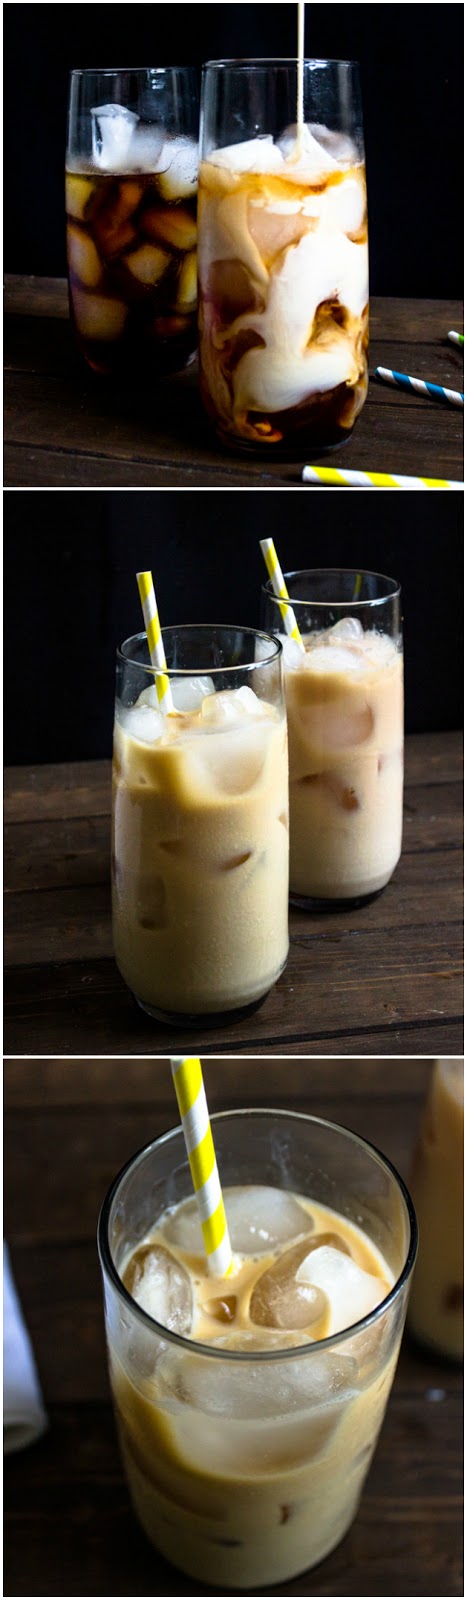 http://gimmedelicious.com/2014/07/18/how-to-make-perfect-iced-coffee-at-home-with-a-keurig/